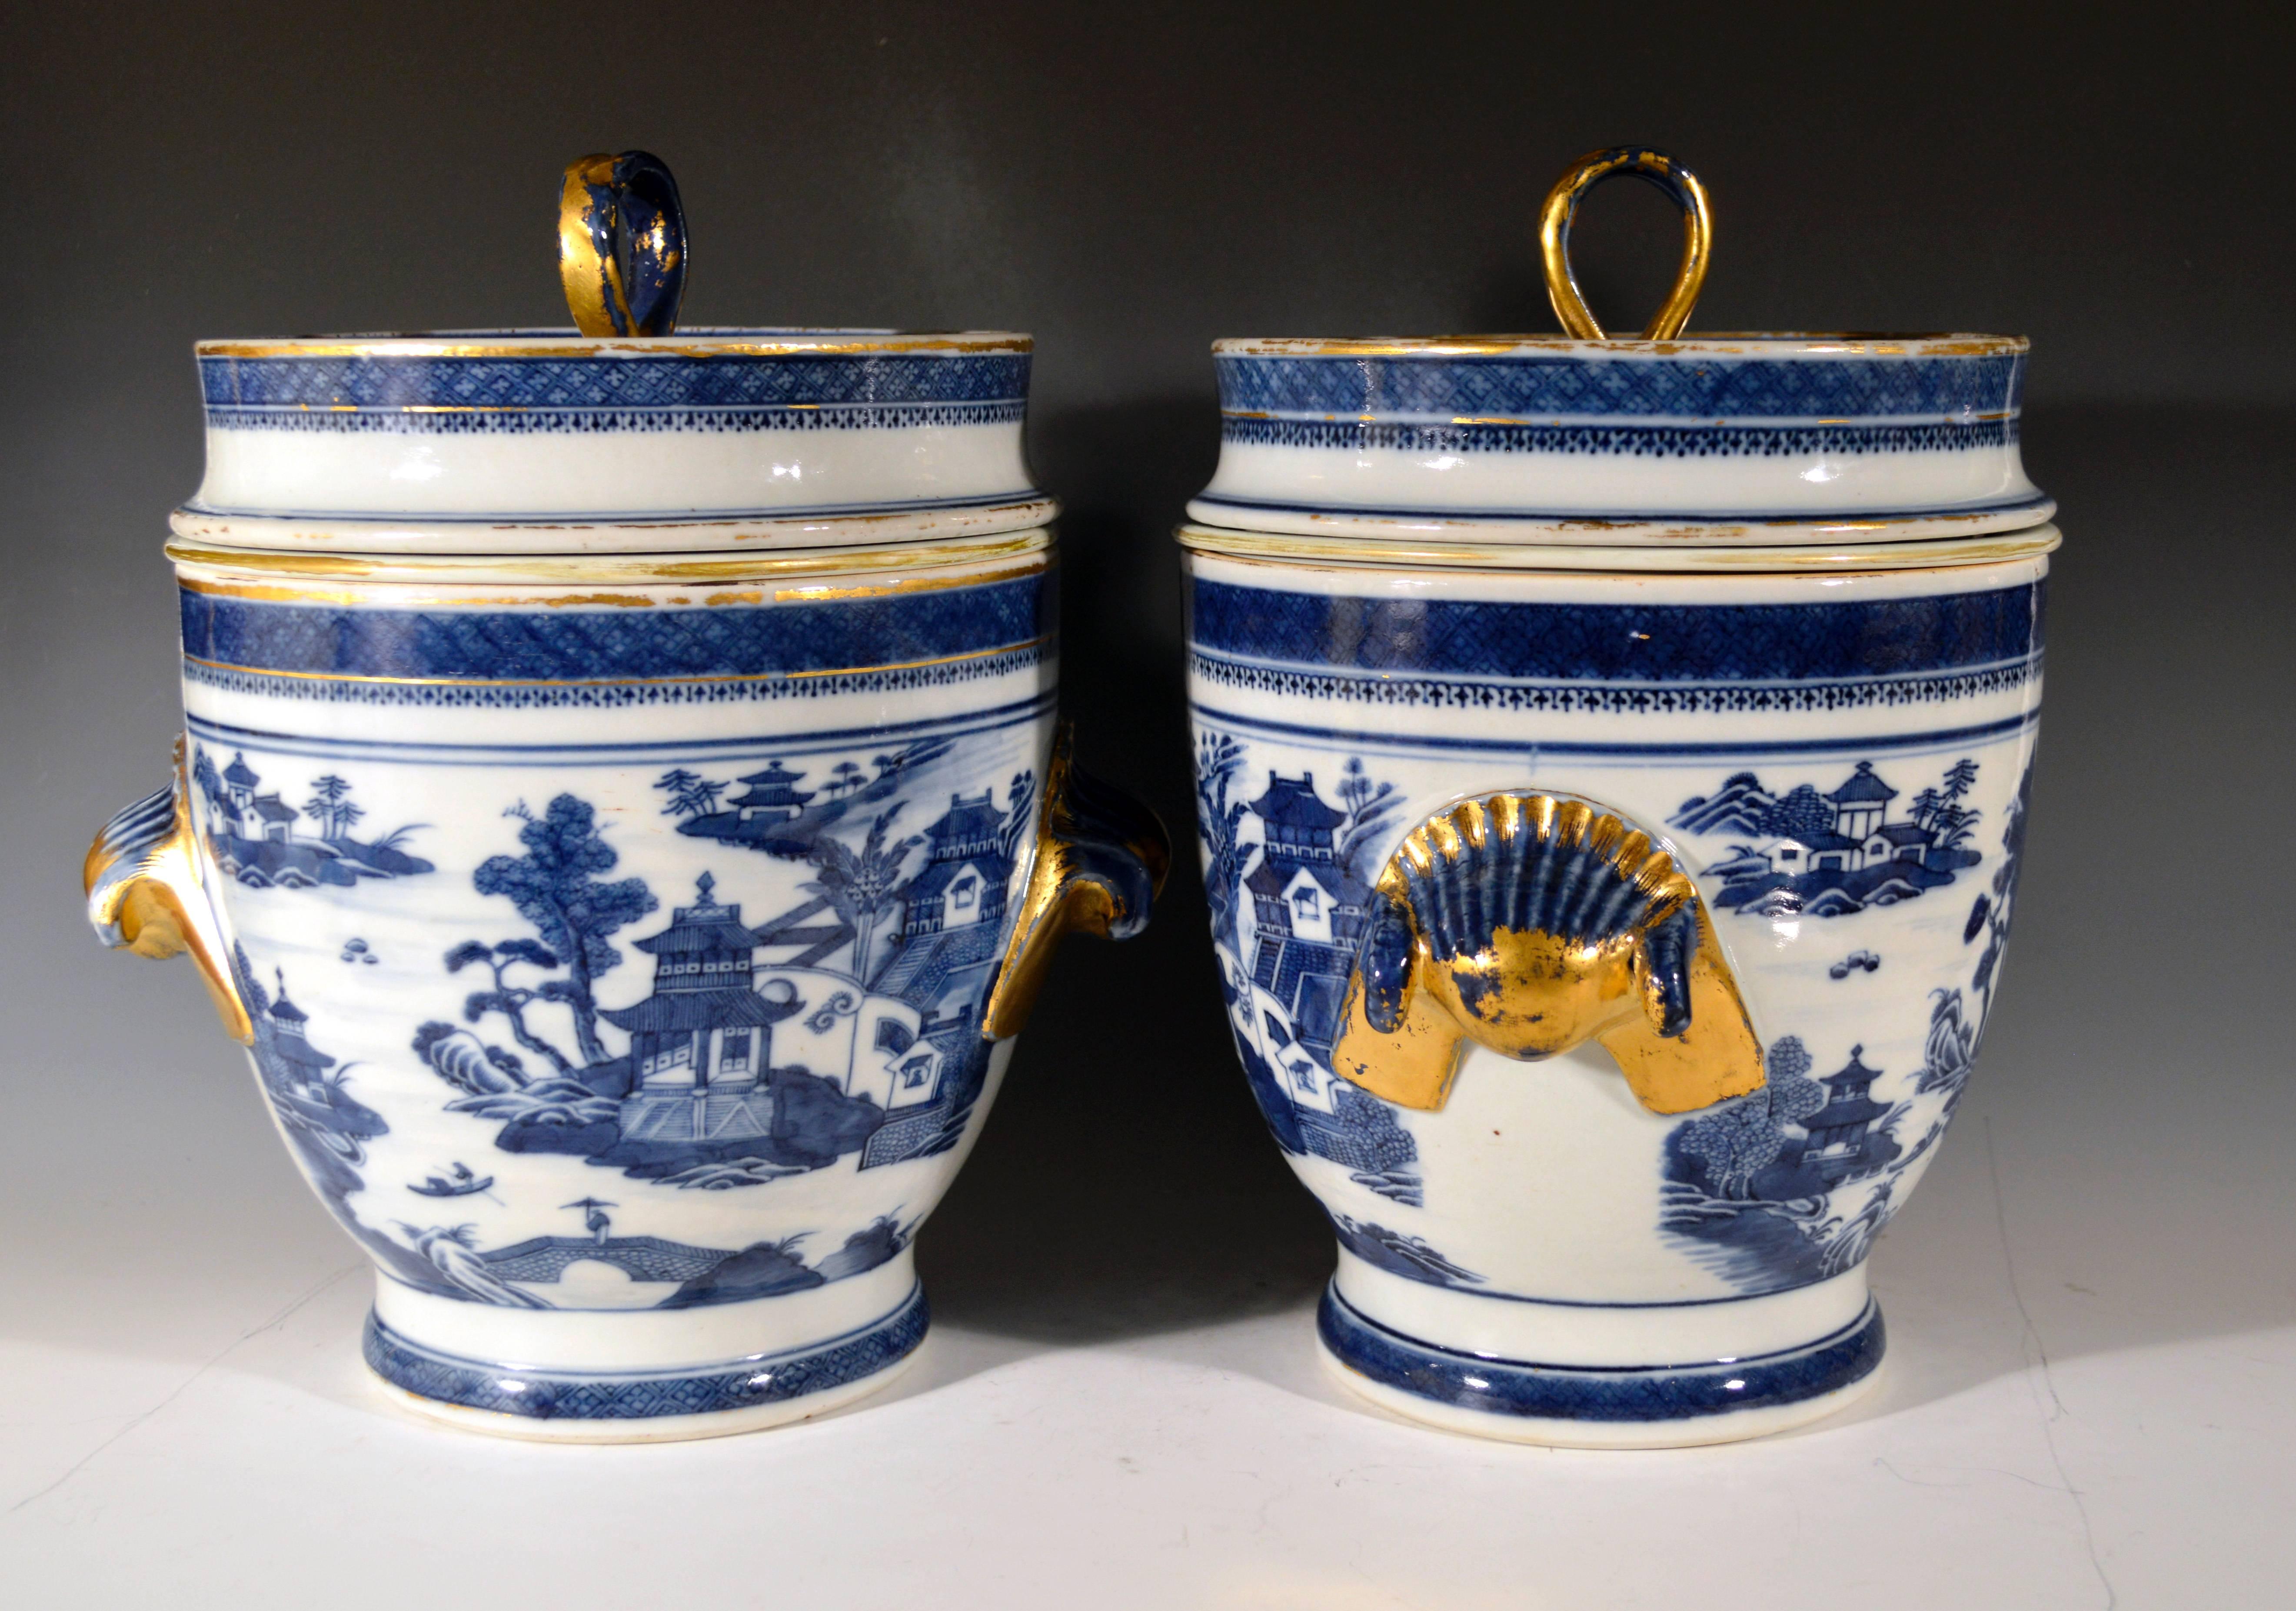 Chinese Export Chinese Blue and White Fruit Coolers, Liners and Covers, circa 1790-1810